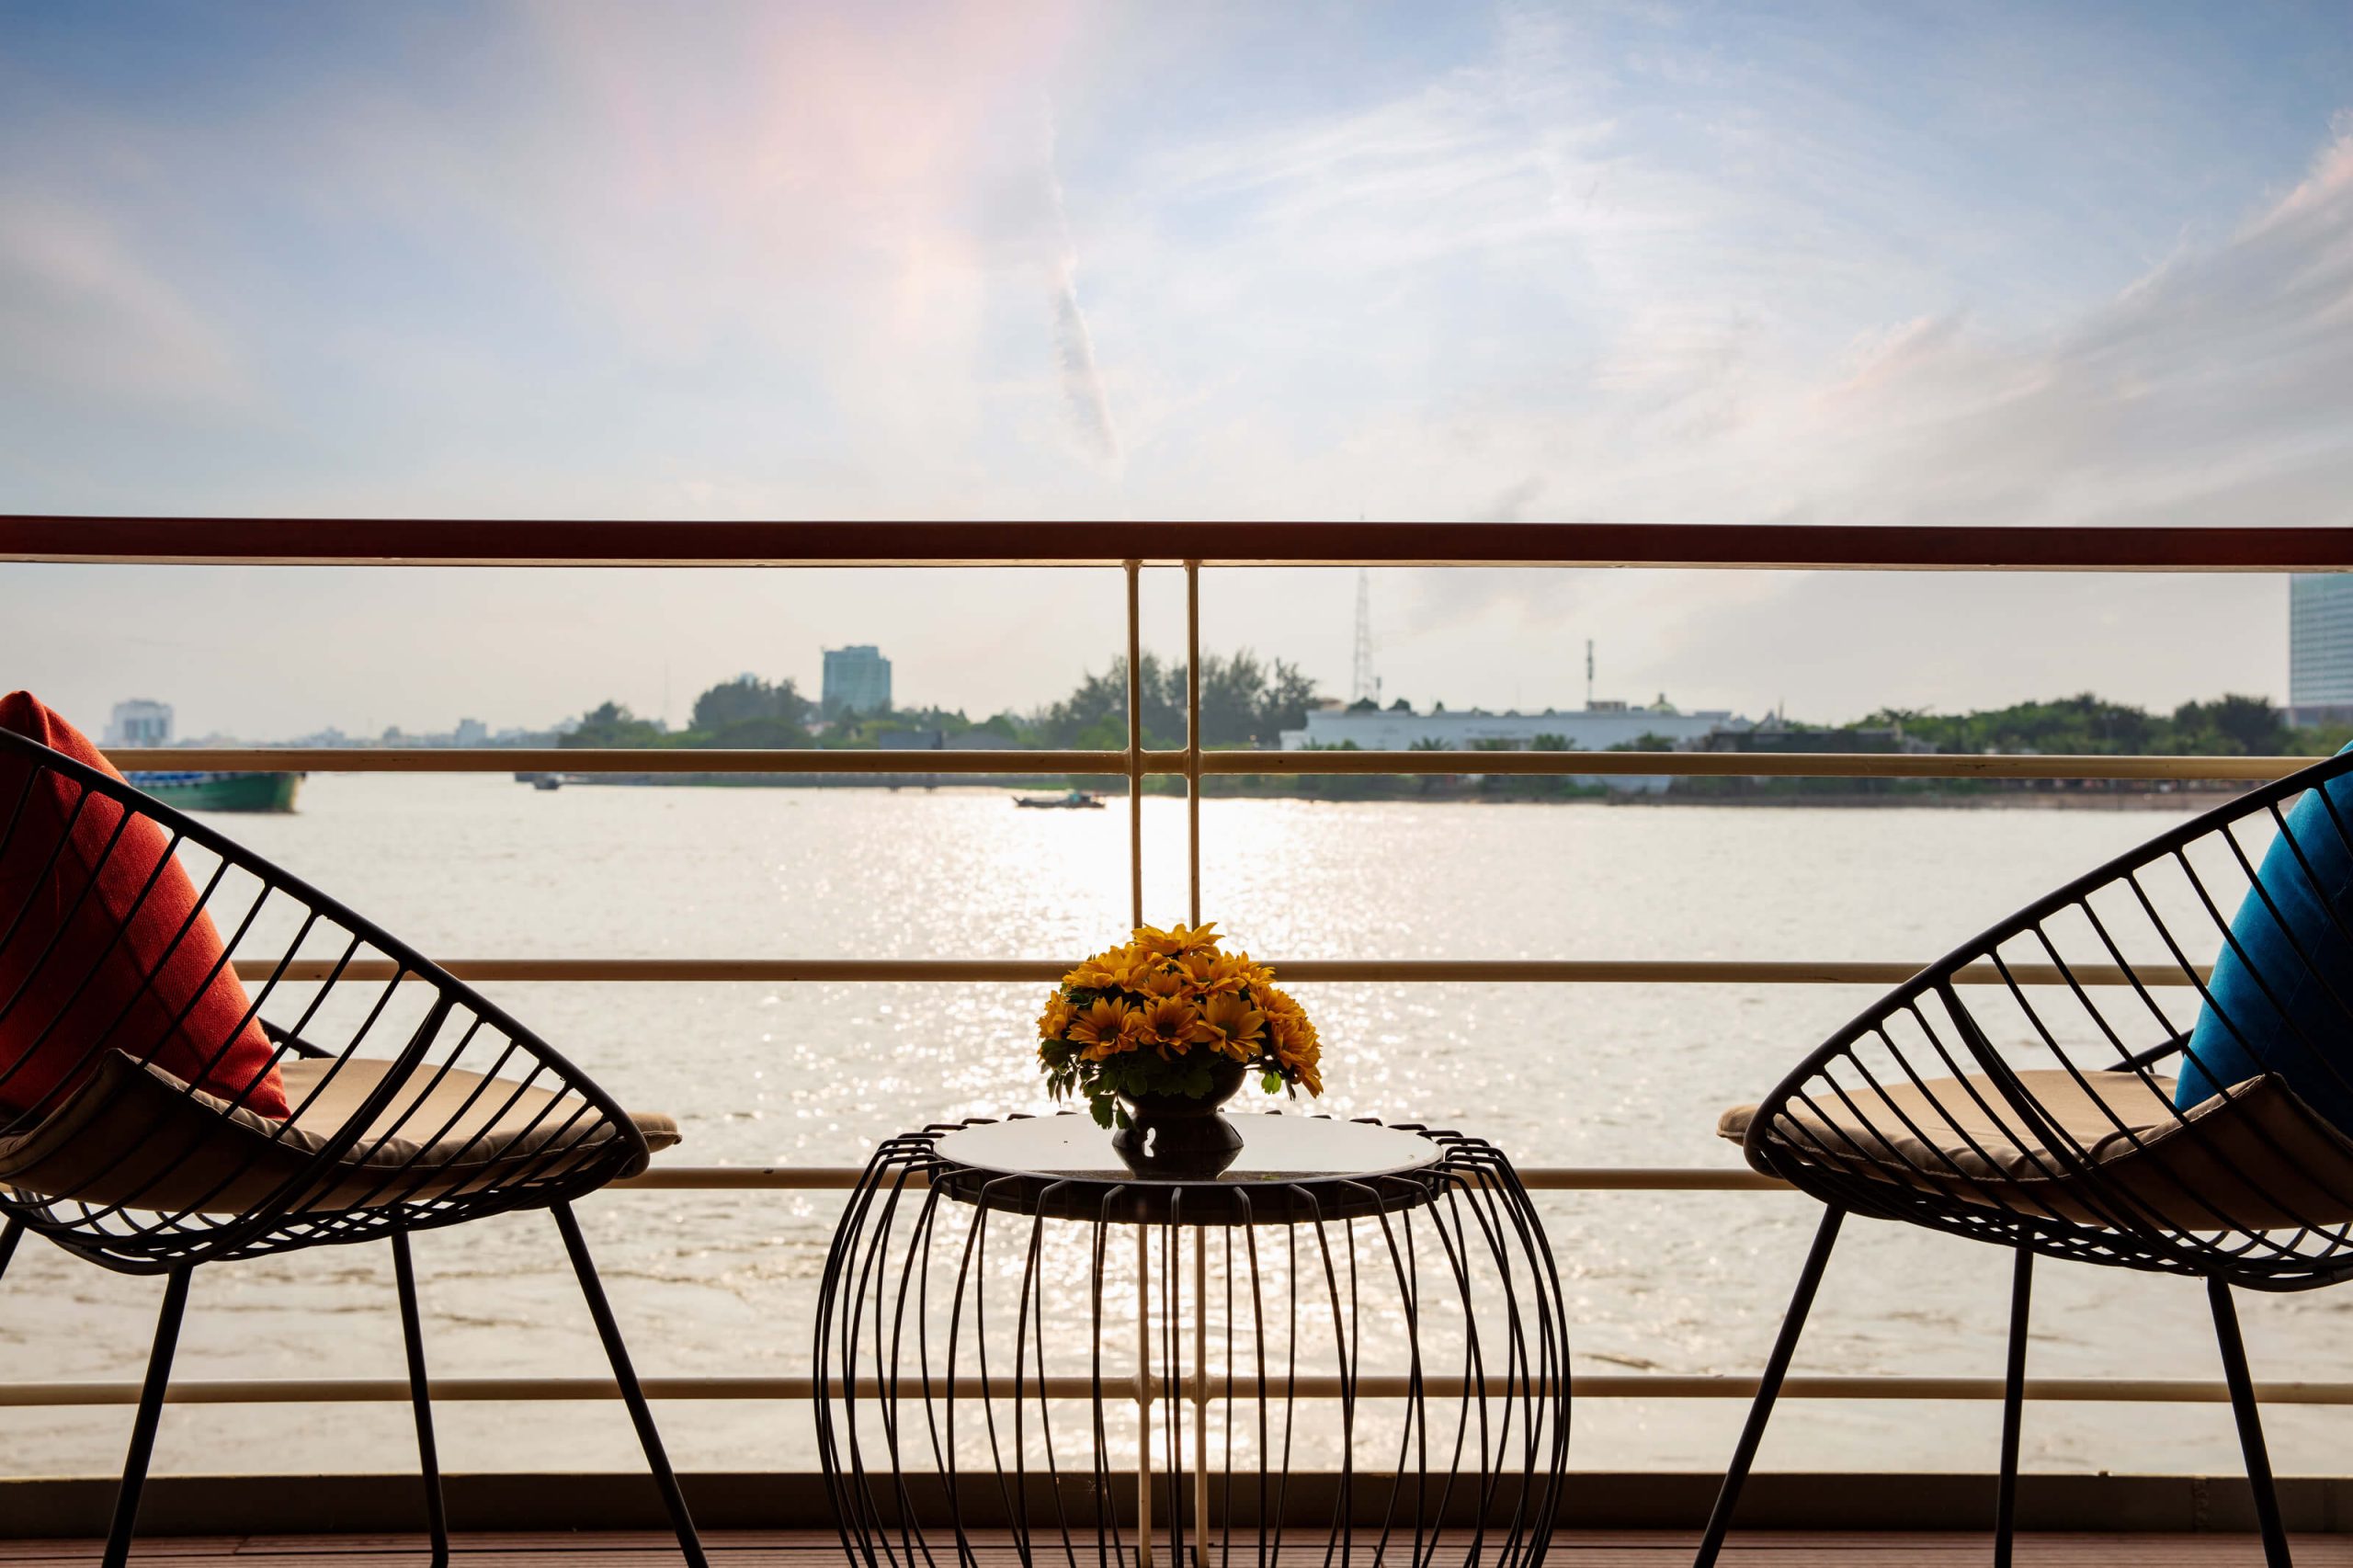 Amazing Victoria Mekong Cruise in the middle Mekong River